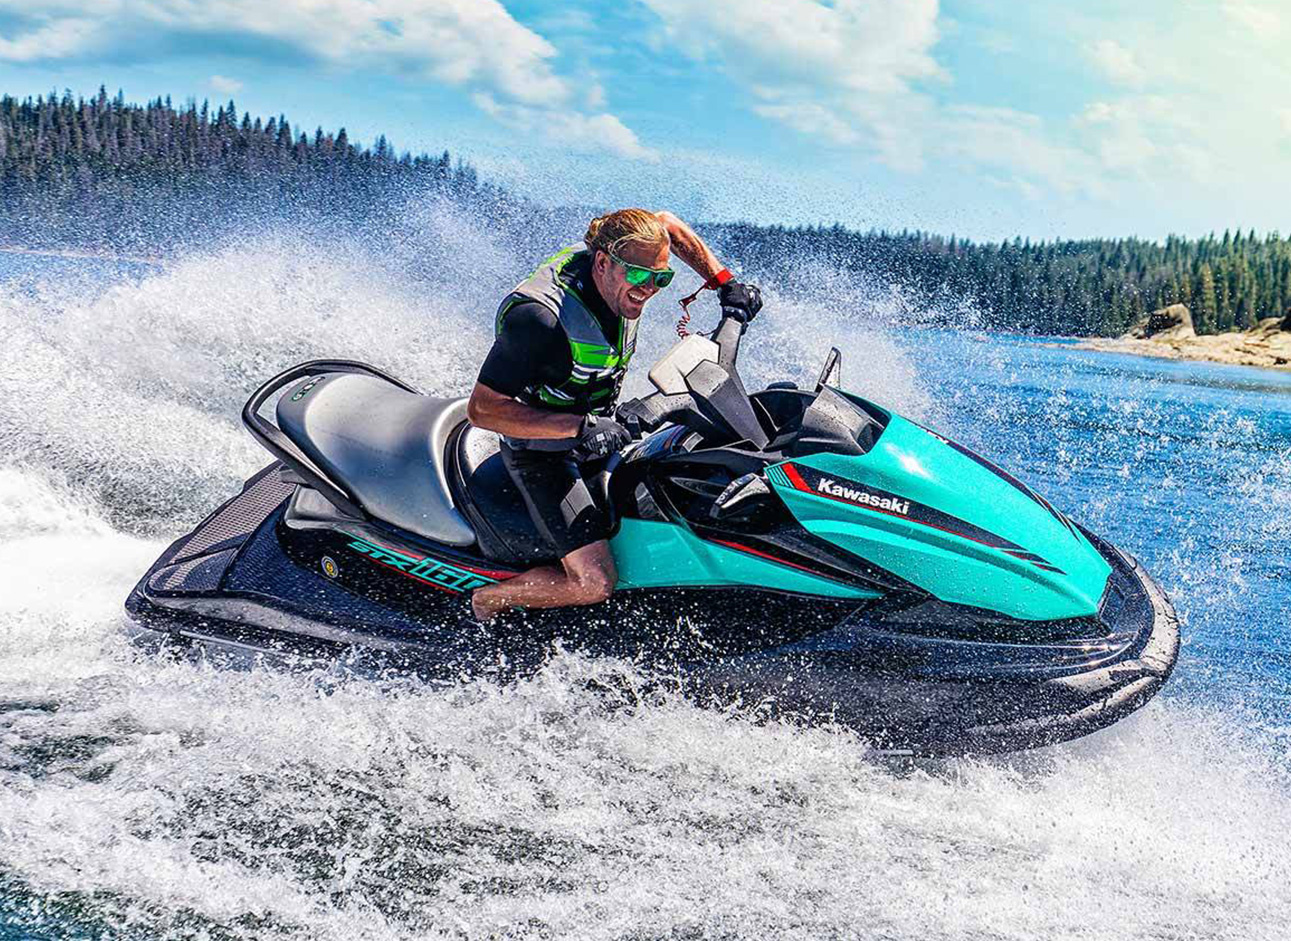 Jet Ski - Feel the adrenaline rush with exhilarating jet ski rides on the water